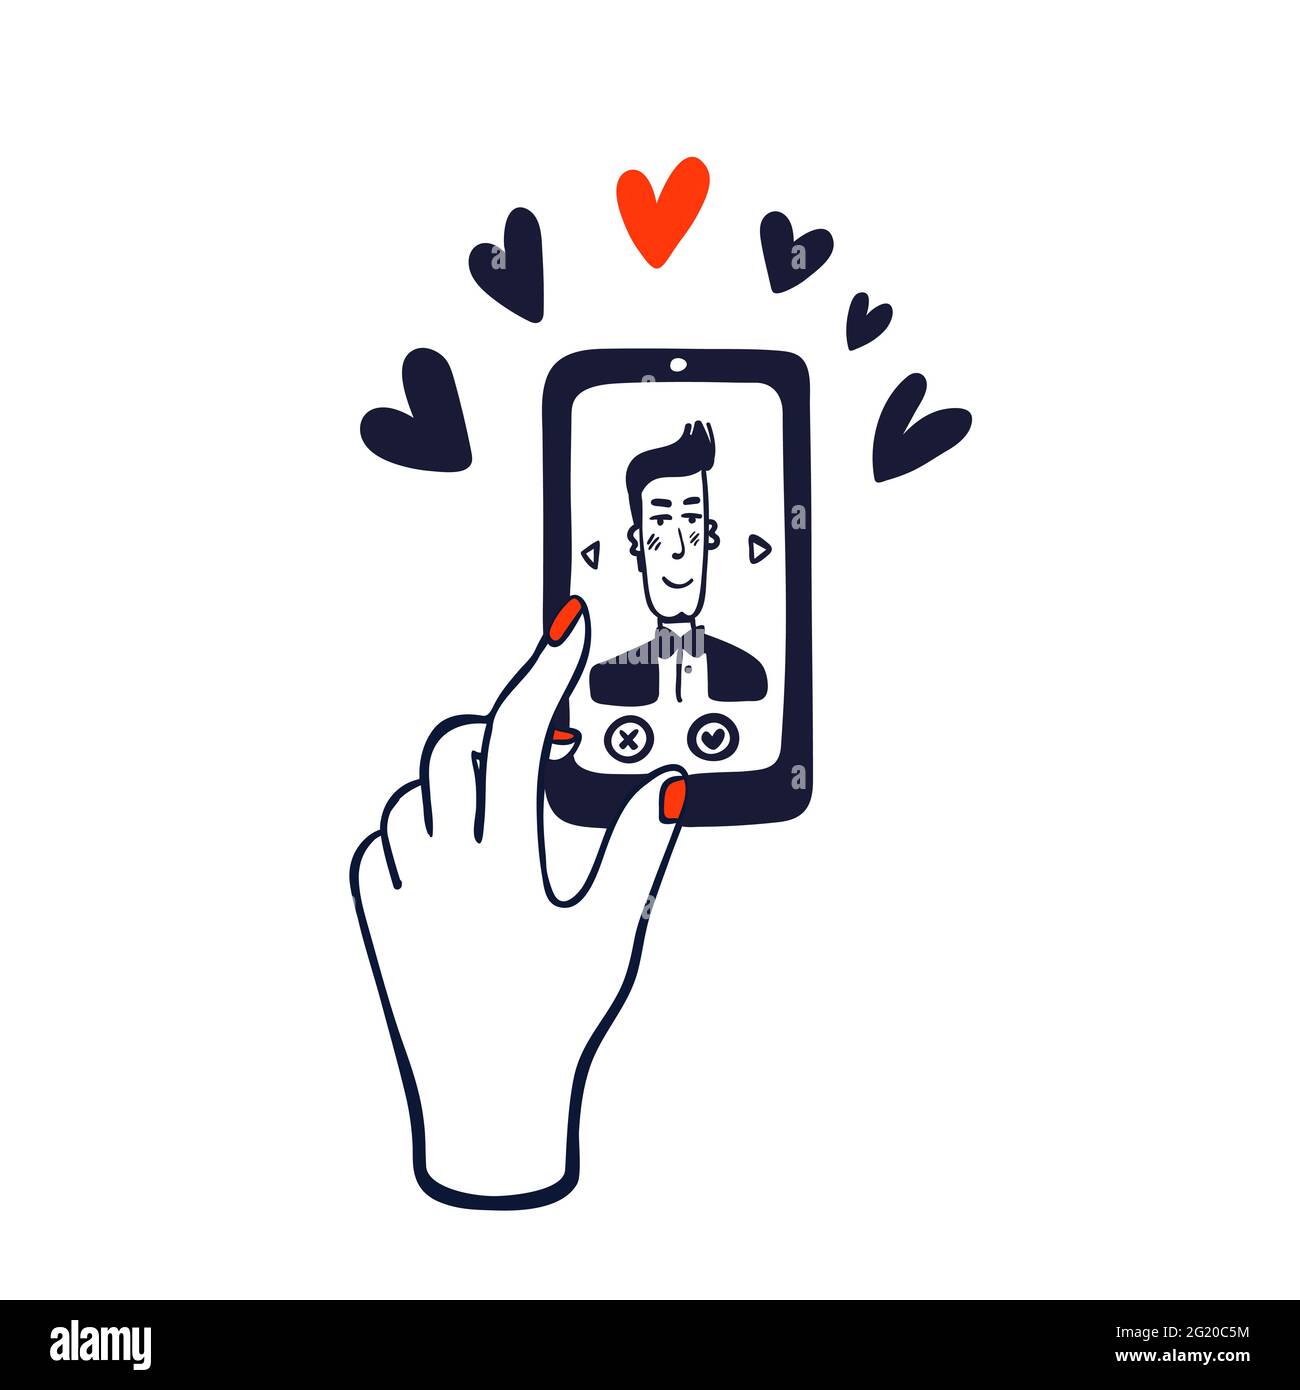 Online dating service. hand swiping photos of men on the phone screen. Mobile phone application. Doodle style vector illustration. Stock Vector